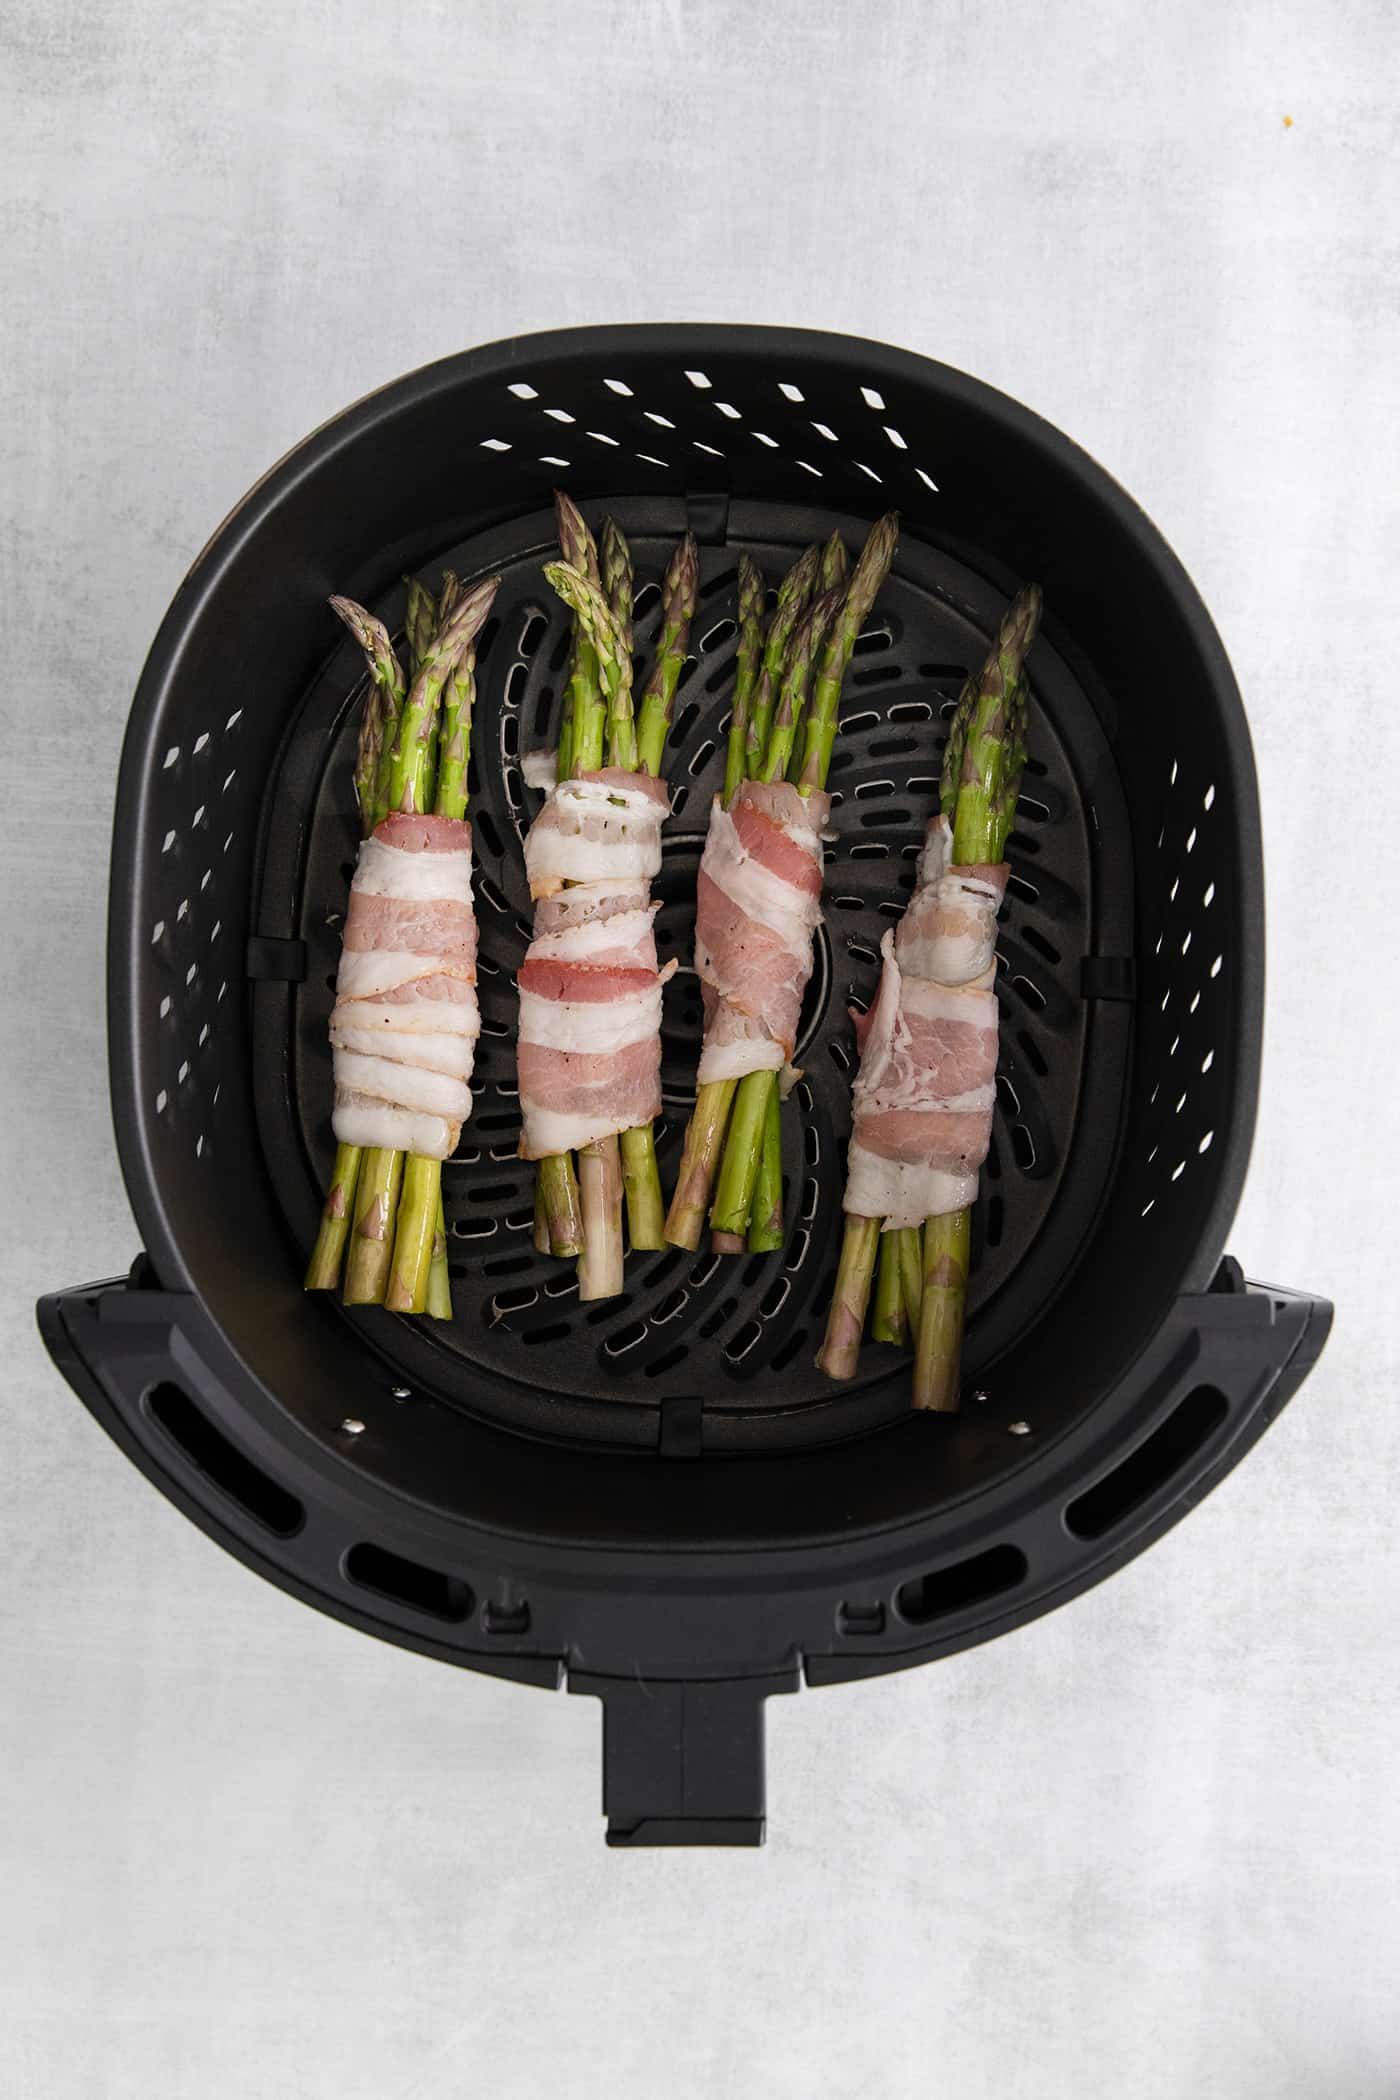 Bacon wrapped asparagus bundles in the air fryer